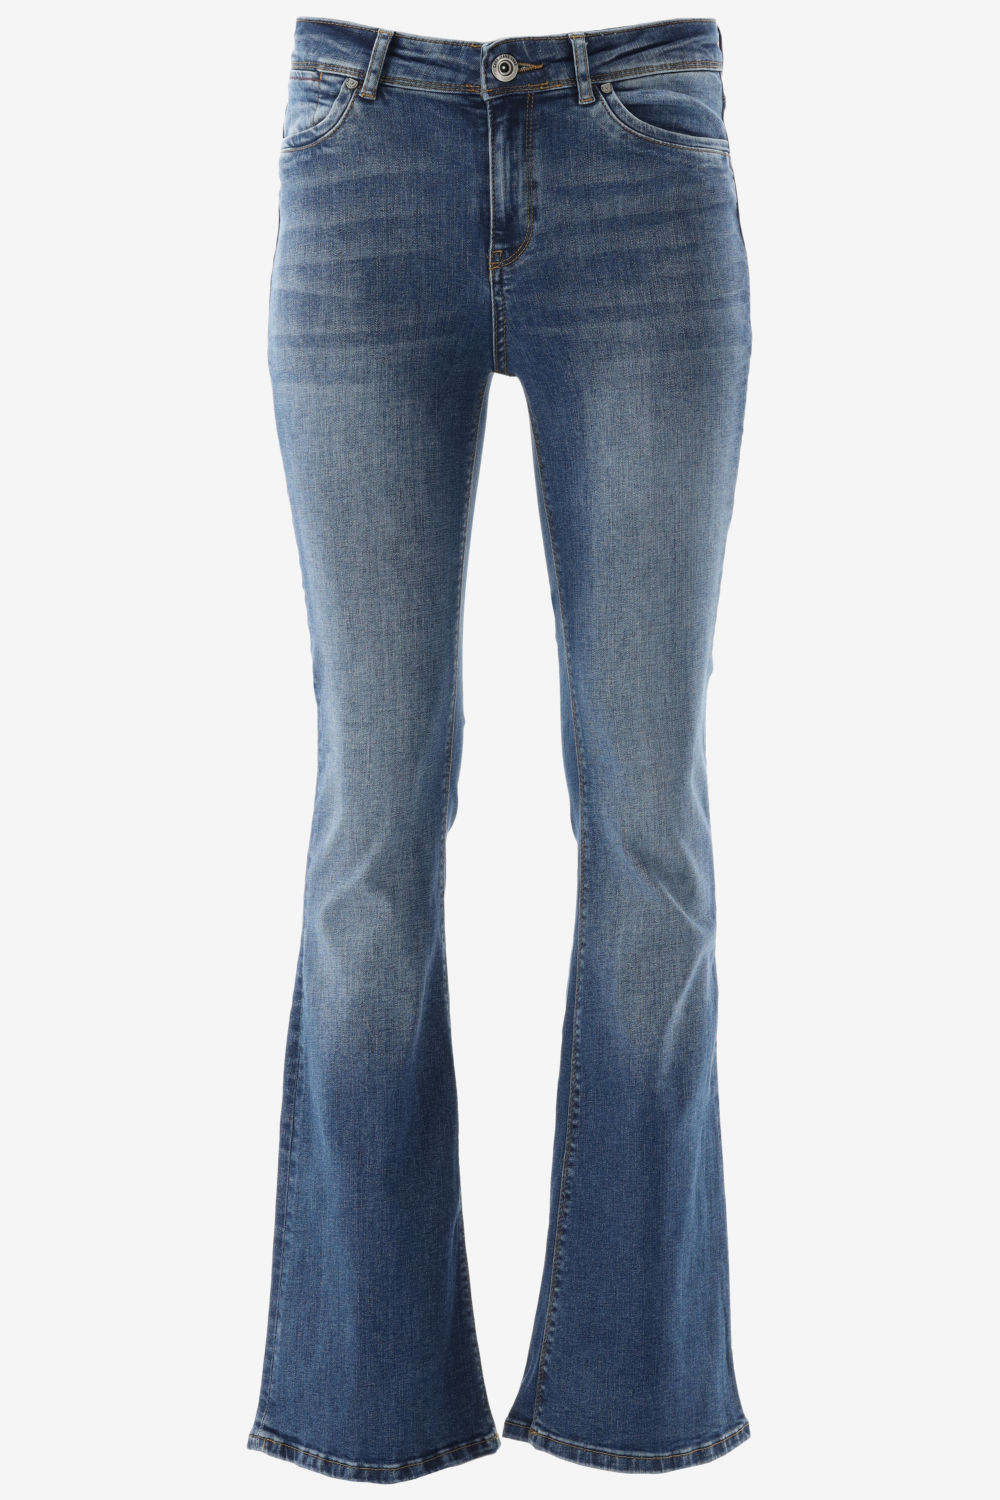 Cars Jeans Michelle Flare Den 78627 Stone Used Dames Maat - W26 X L30